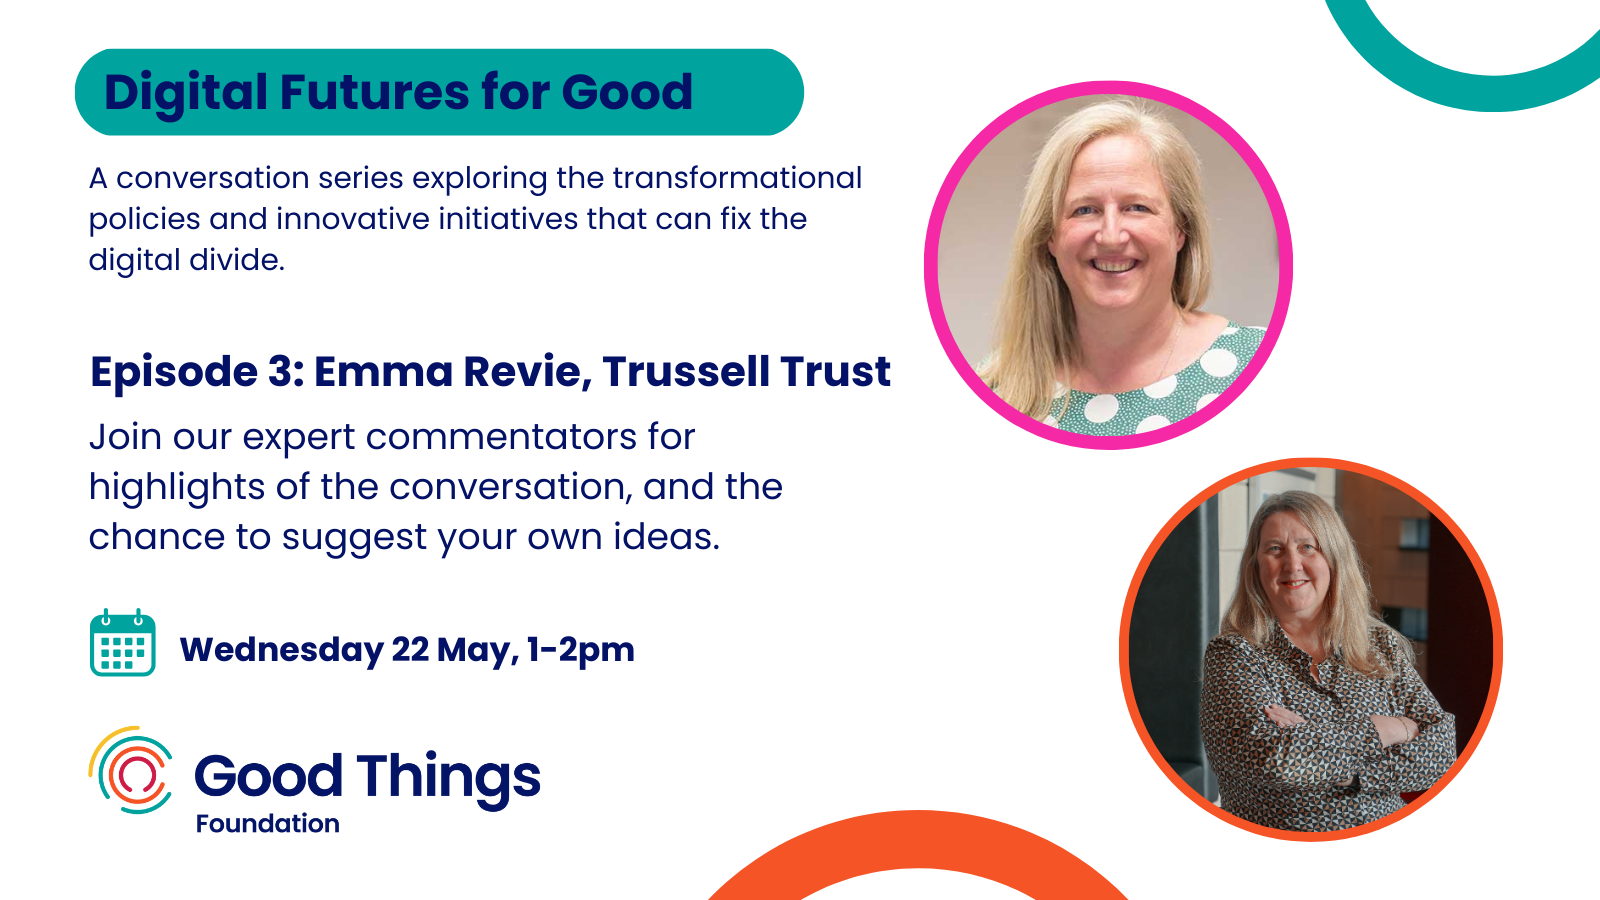 Digital Futures for Good: A conversation series exploring the transformational policies and innovative initiatives that can fix the digital divide. Episode 3: Emma Revie, Trussell Trust. Join our expert commentators for highlights of the conversation, and the chance to suggest your own ideas. Wednesday 22 May, 1-2pm